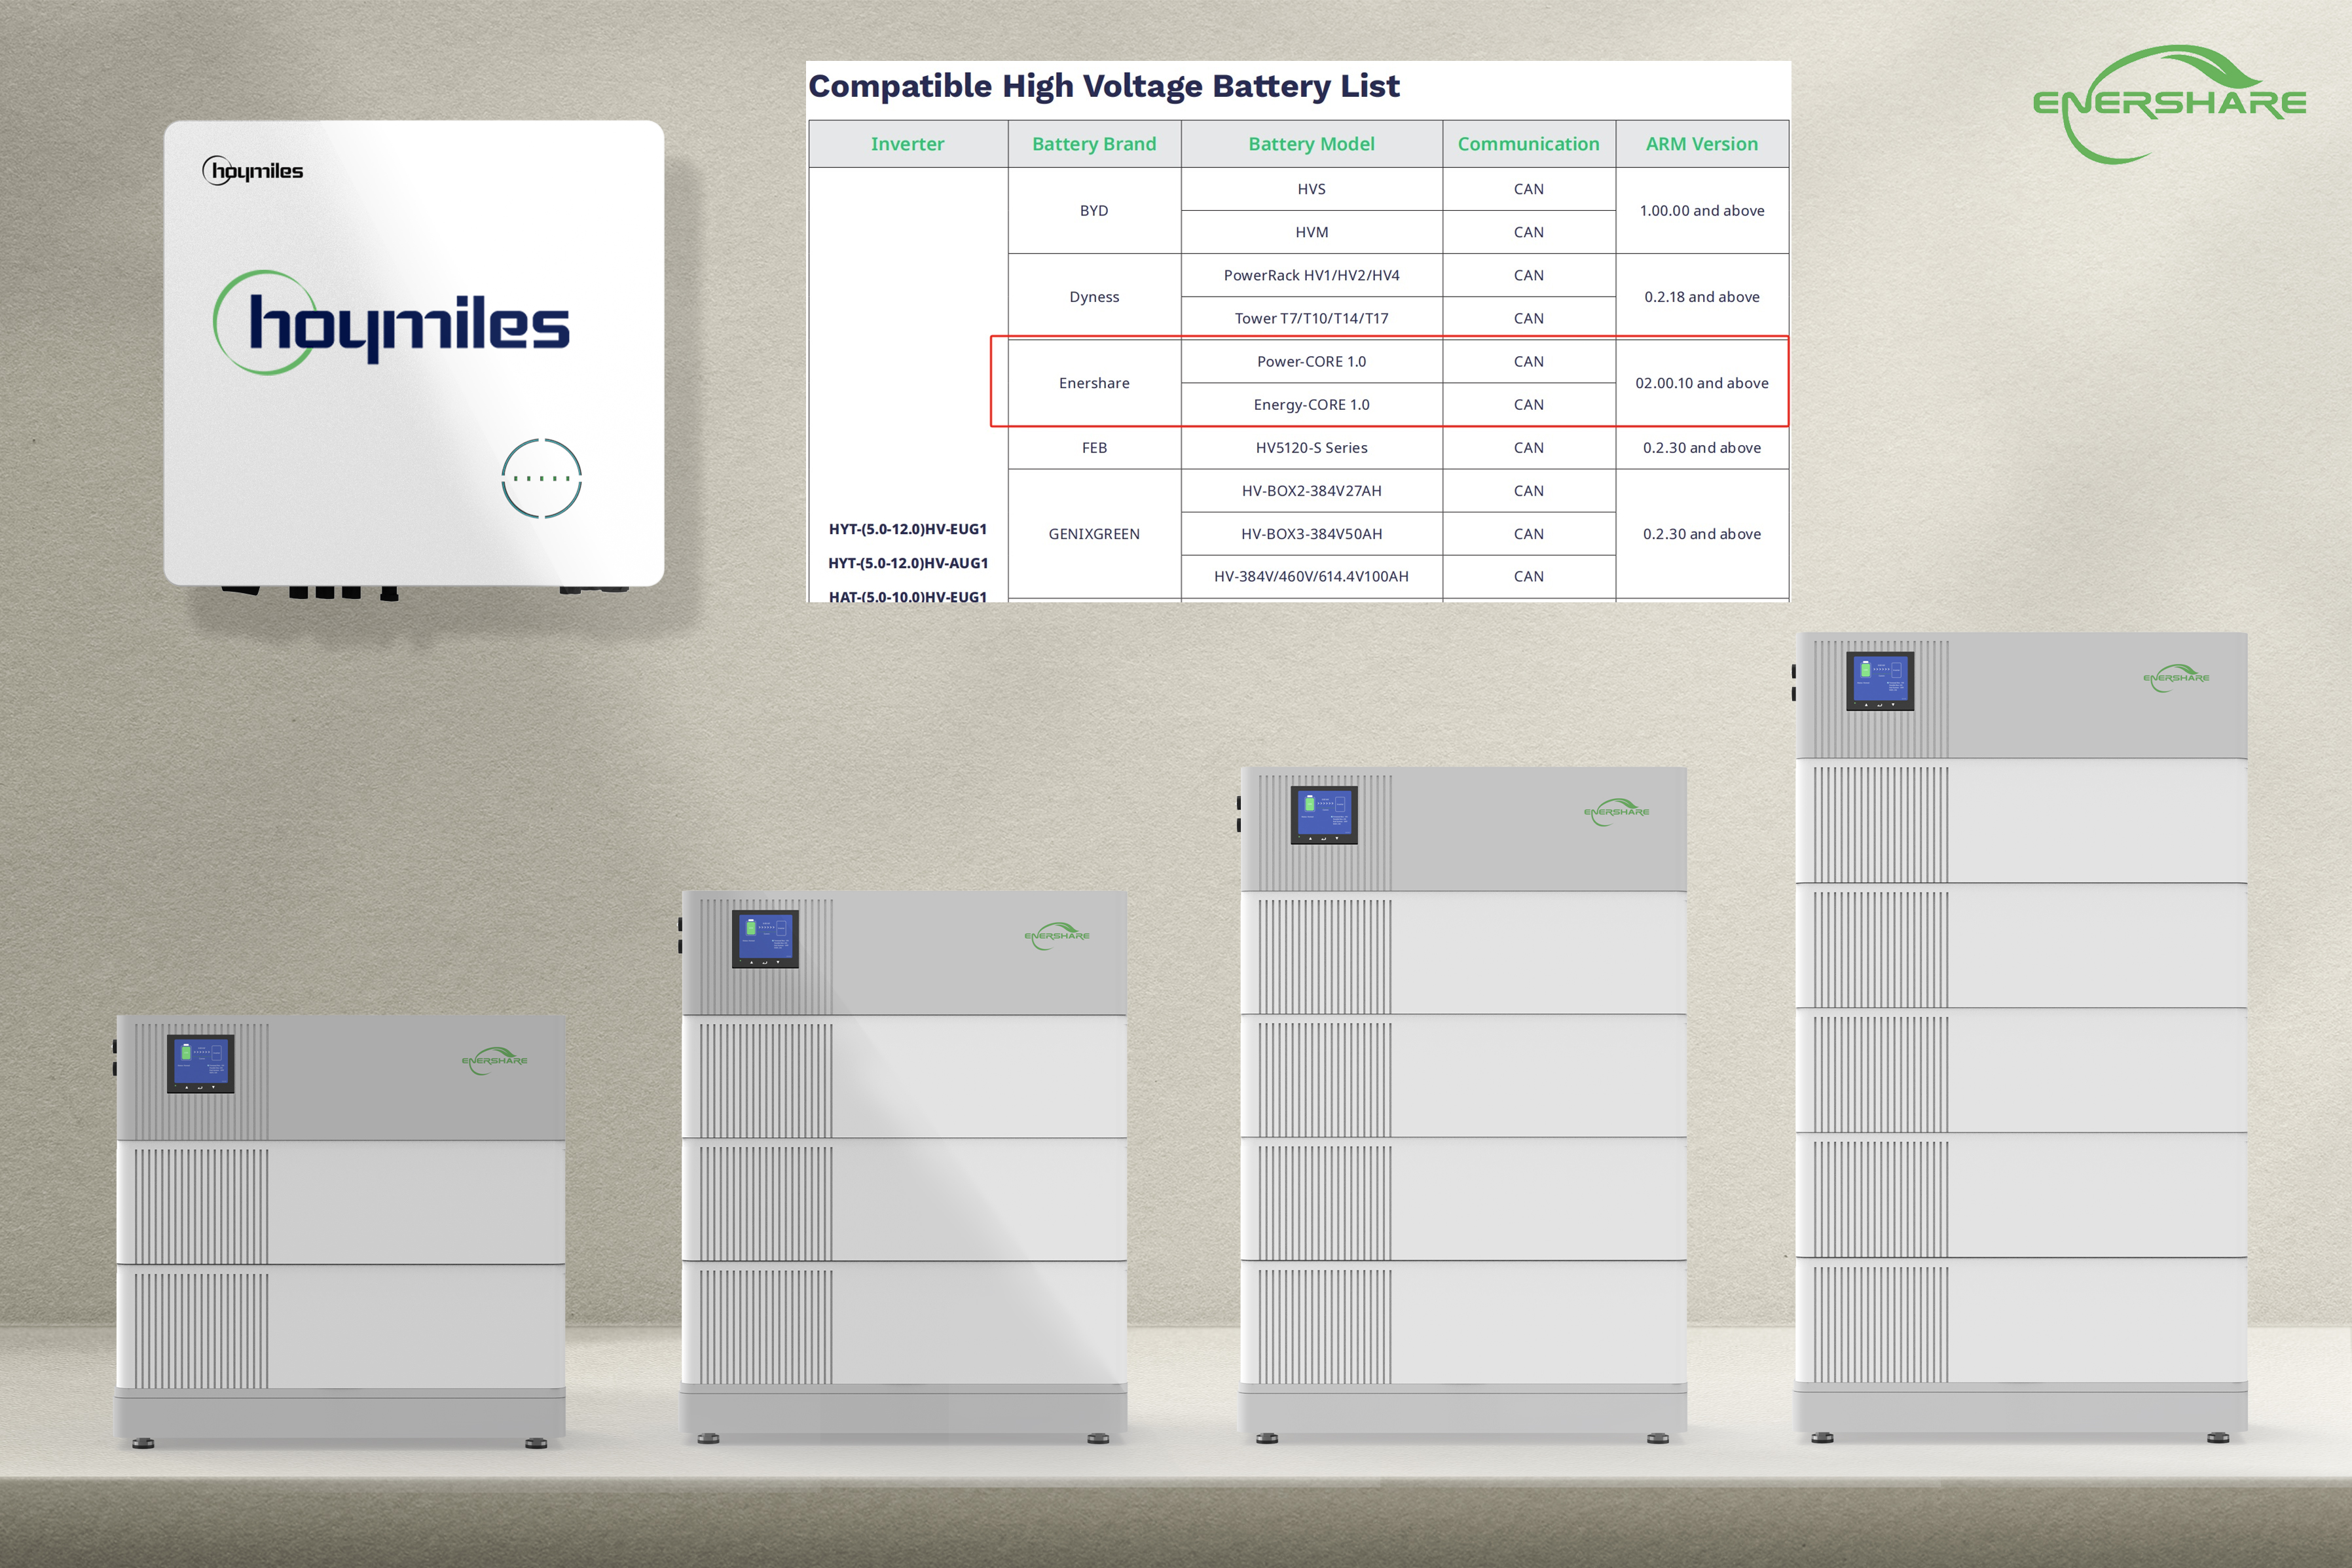 Enershare Energy Core series battery has been listed on hoymiles inverter match list 📇 ！